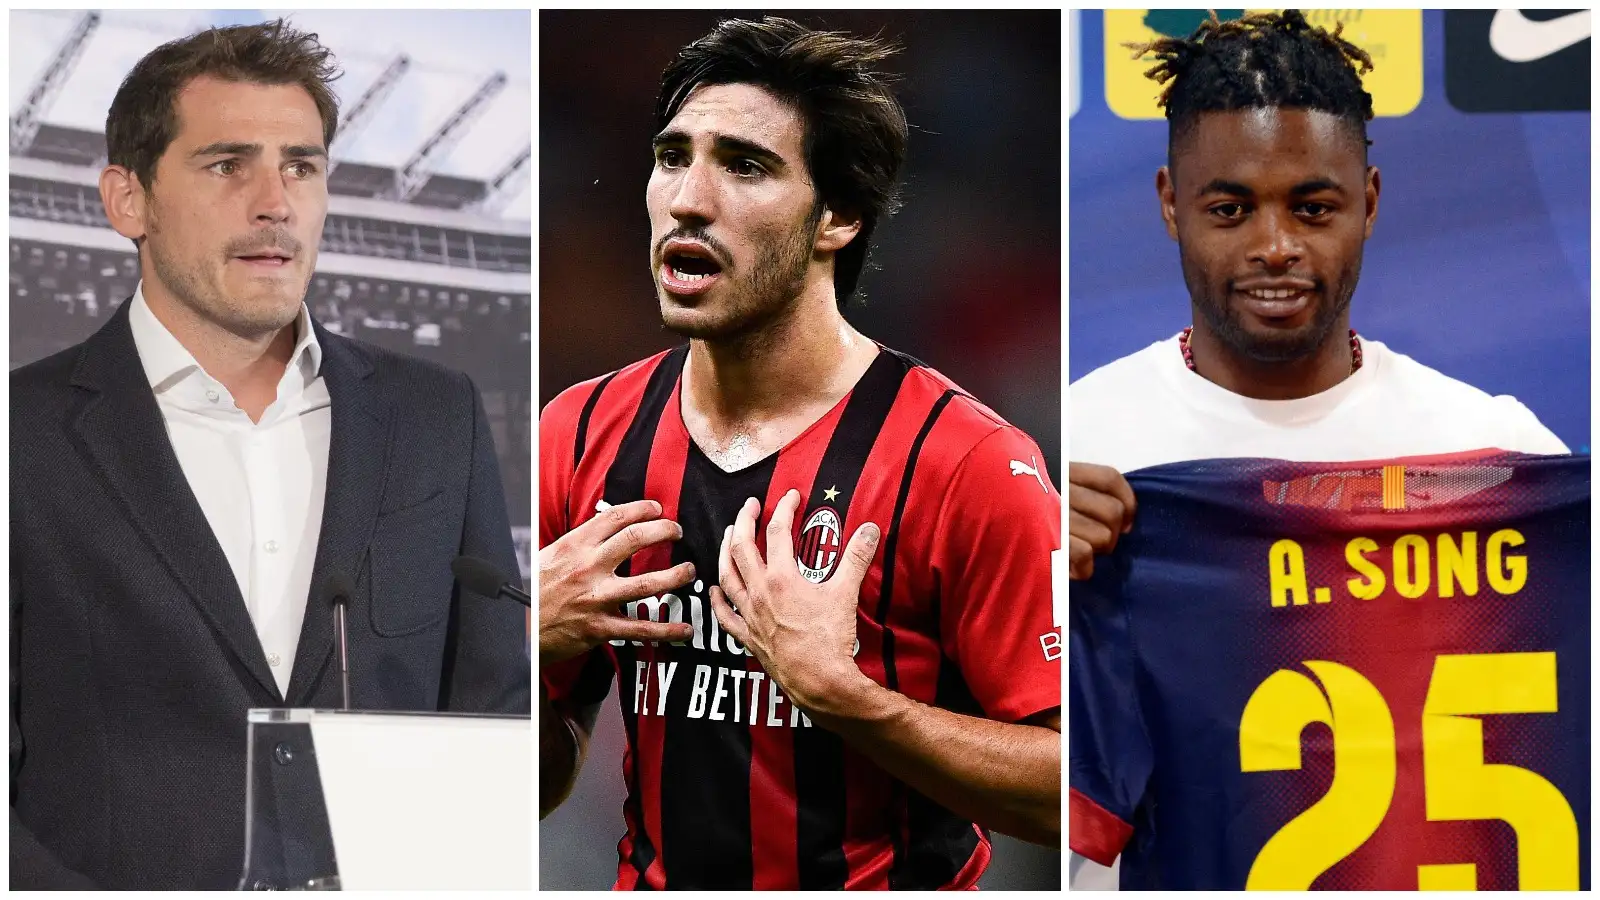 Iker Casillas, Sandro Tonali and Alex Song all were upset to leave their clubs.